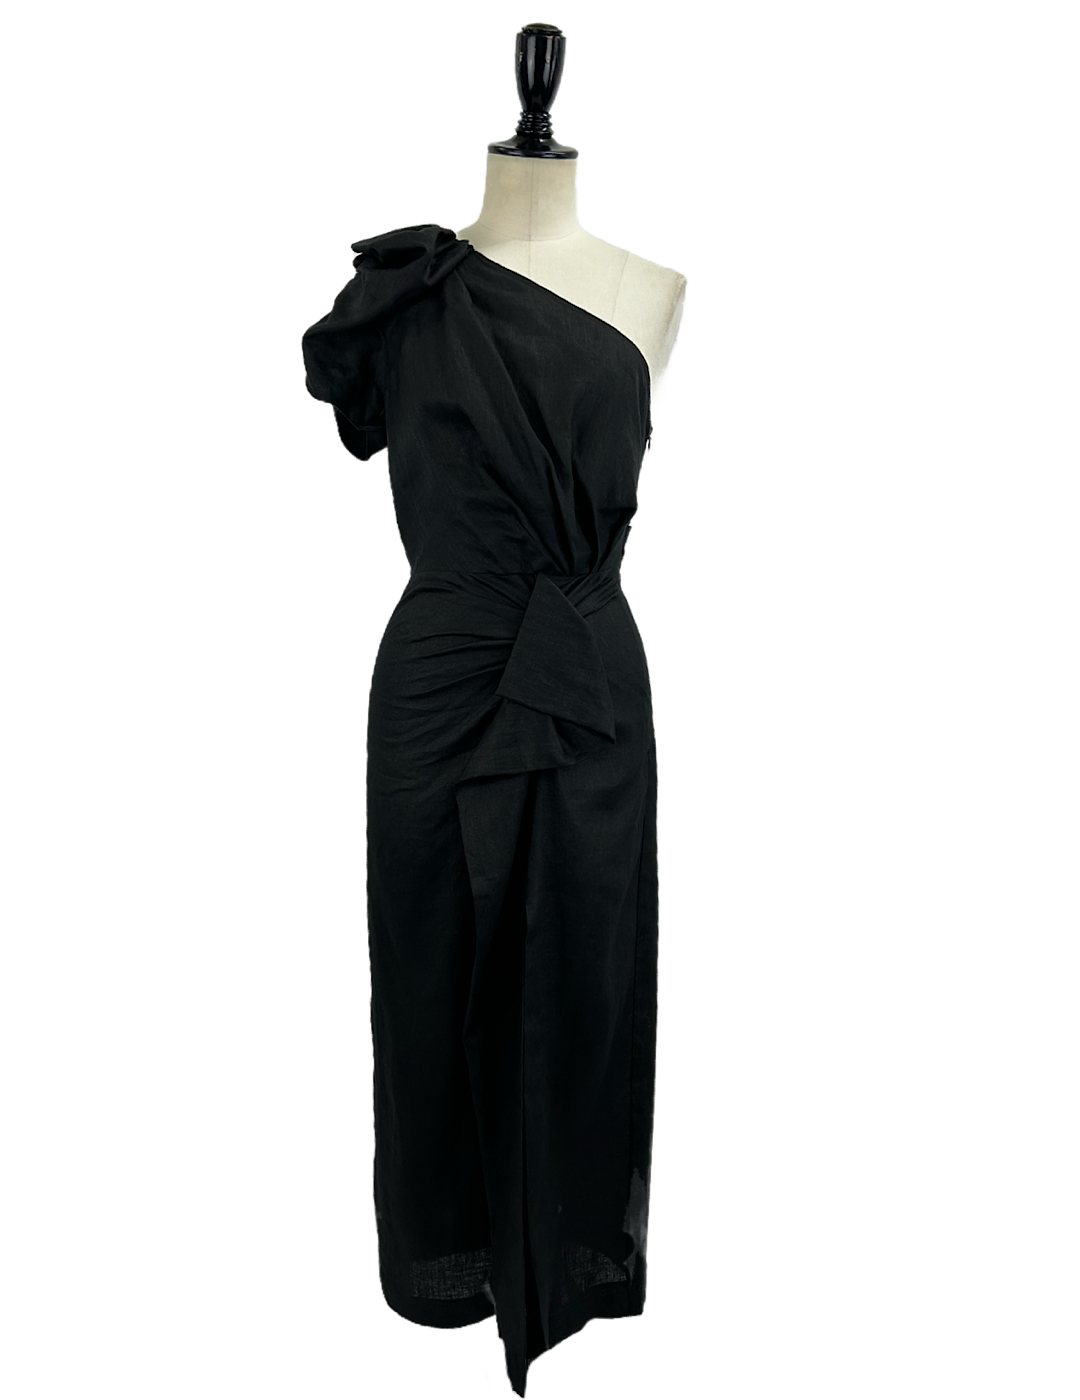 <img class='new_mark_img1' src='https://img.shop-pro.jp/img/new/icons6.gif' style='border:none;display:inline;margin:0px;padding:0px;width:auto;' />MEIMEIJ / ONE SHOULDER BLACK DRESS